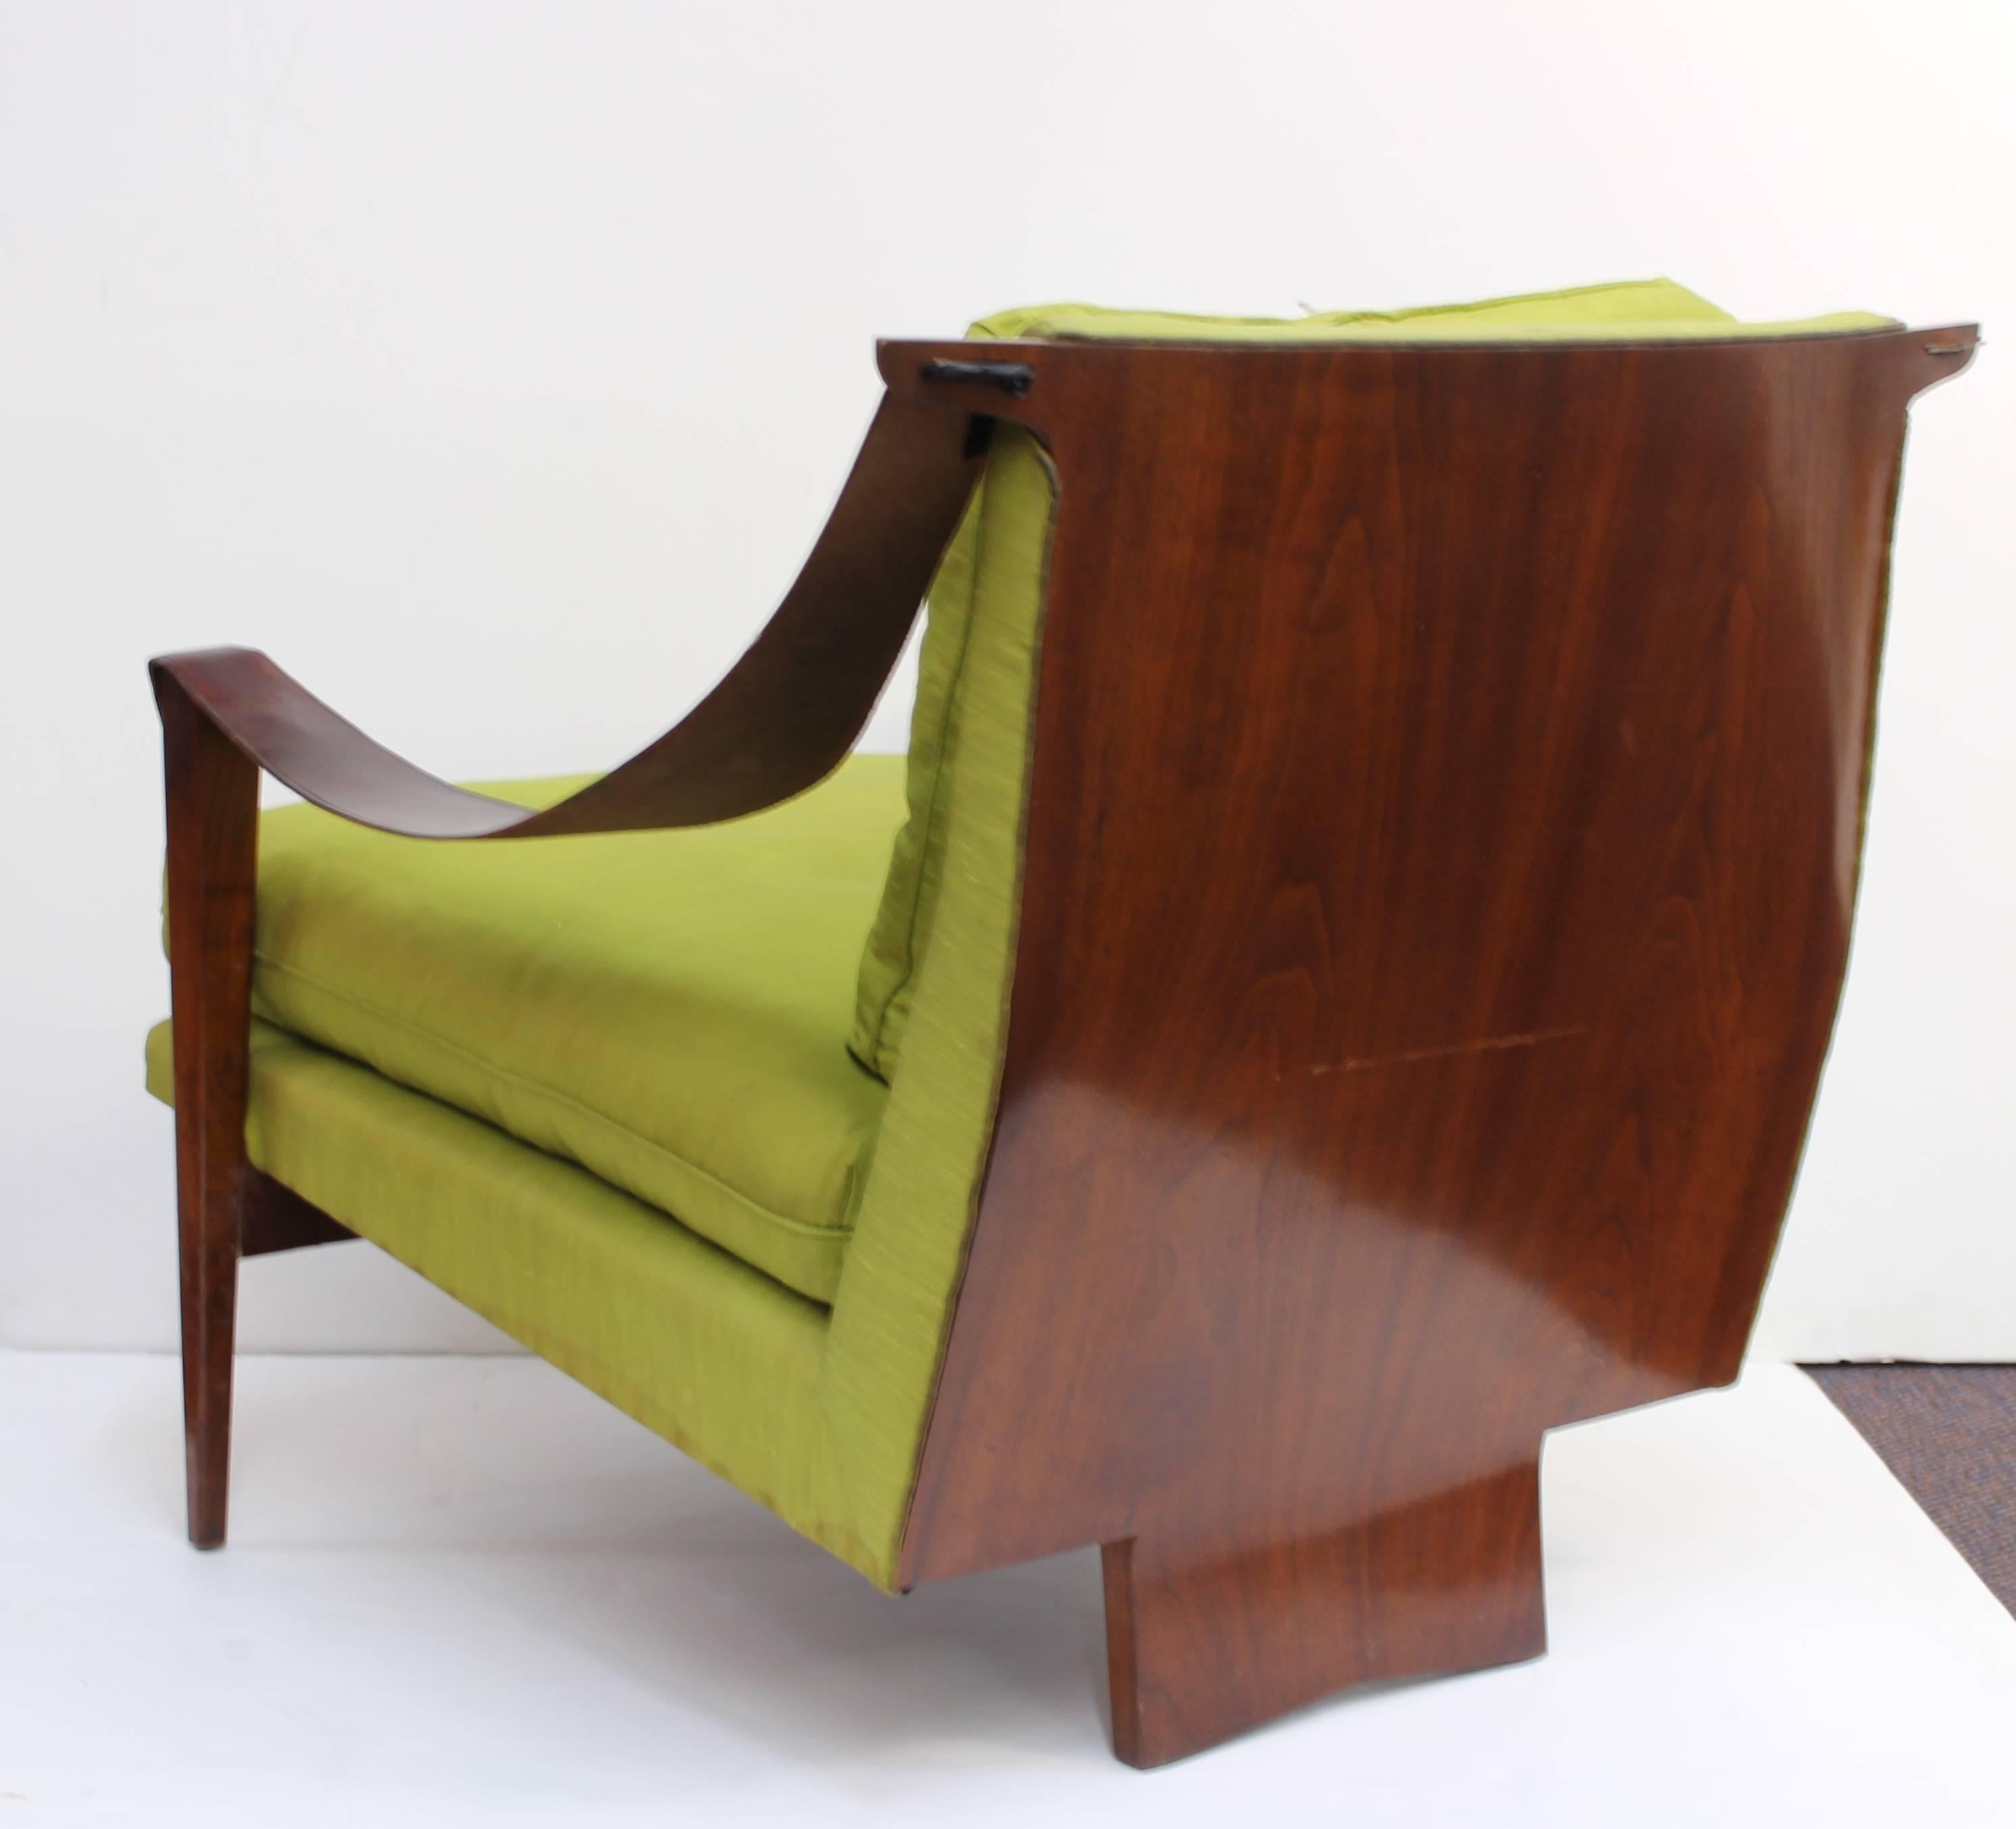 chartreuse armchair